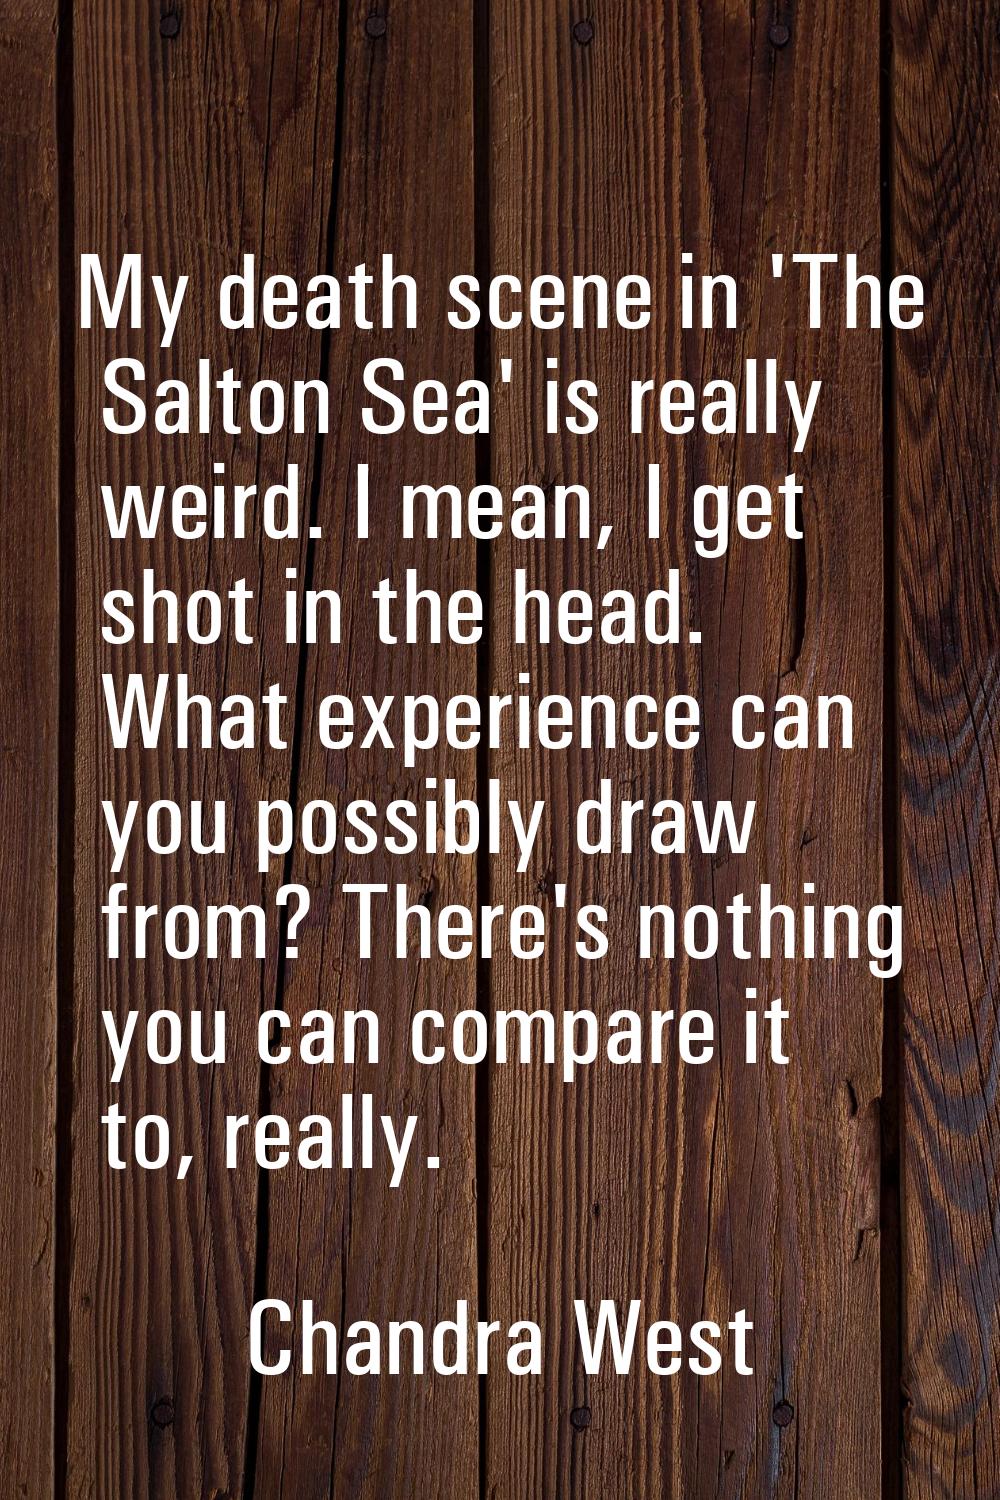 My death scene in 'The Salton Sea' is really weird. I mean, I get shot in the head. What experience